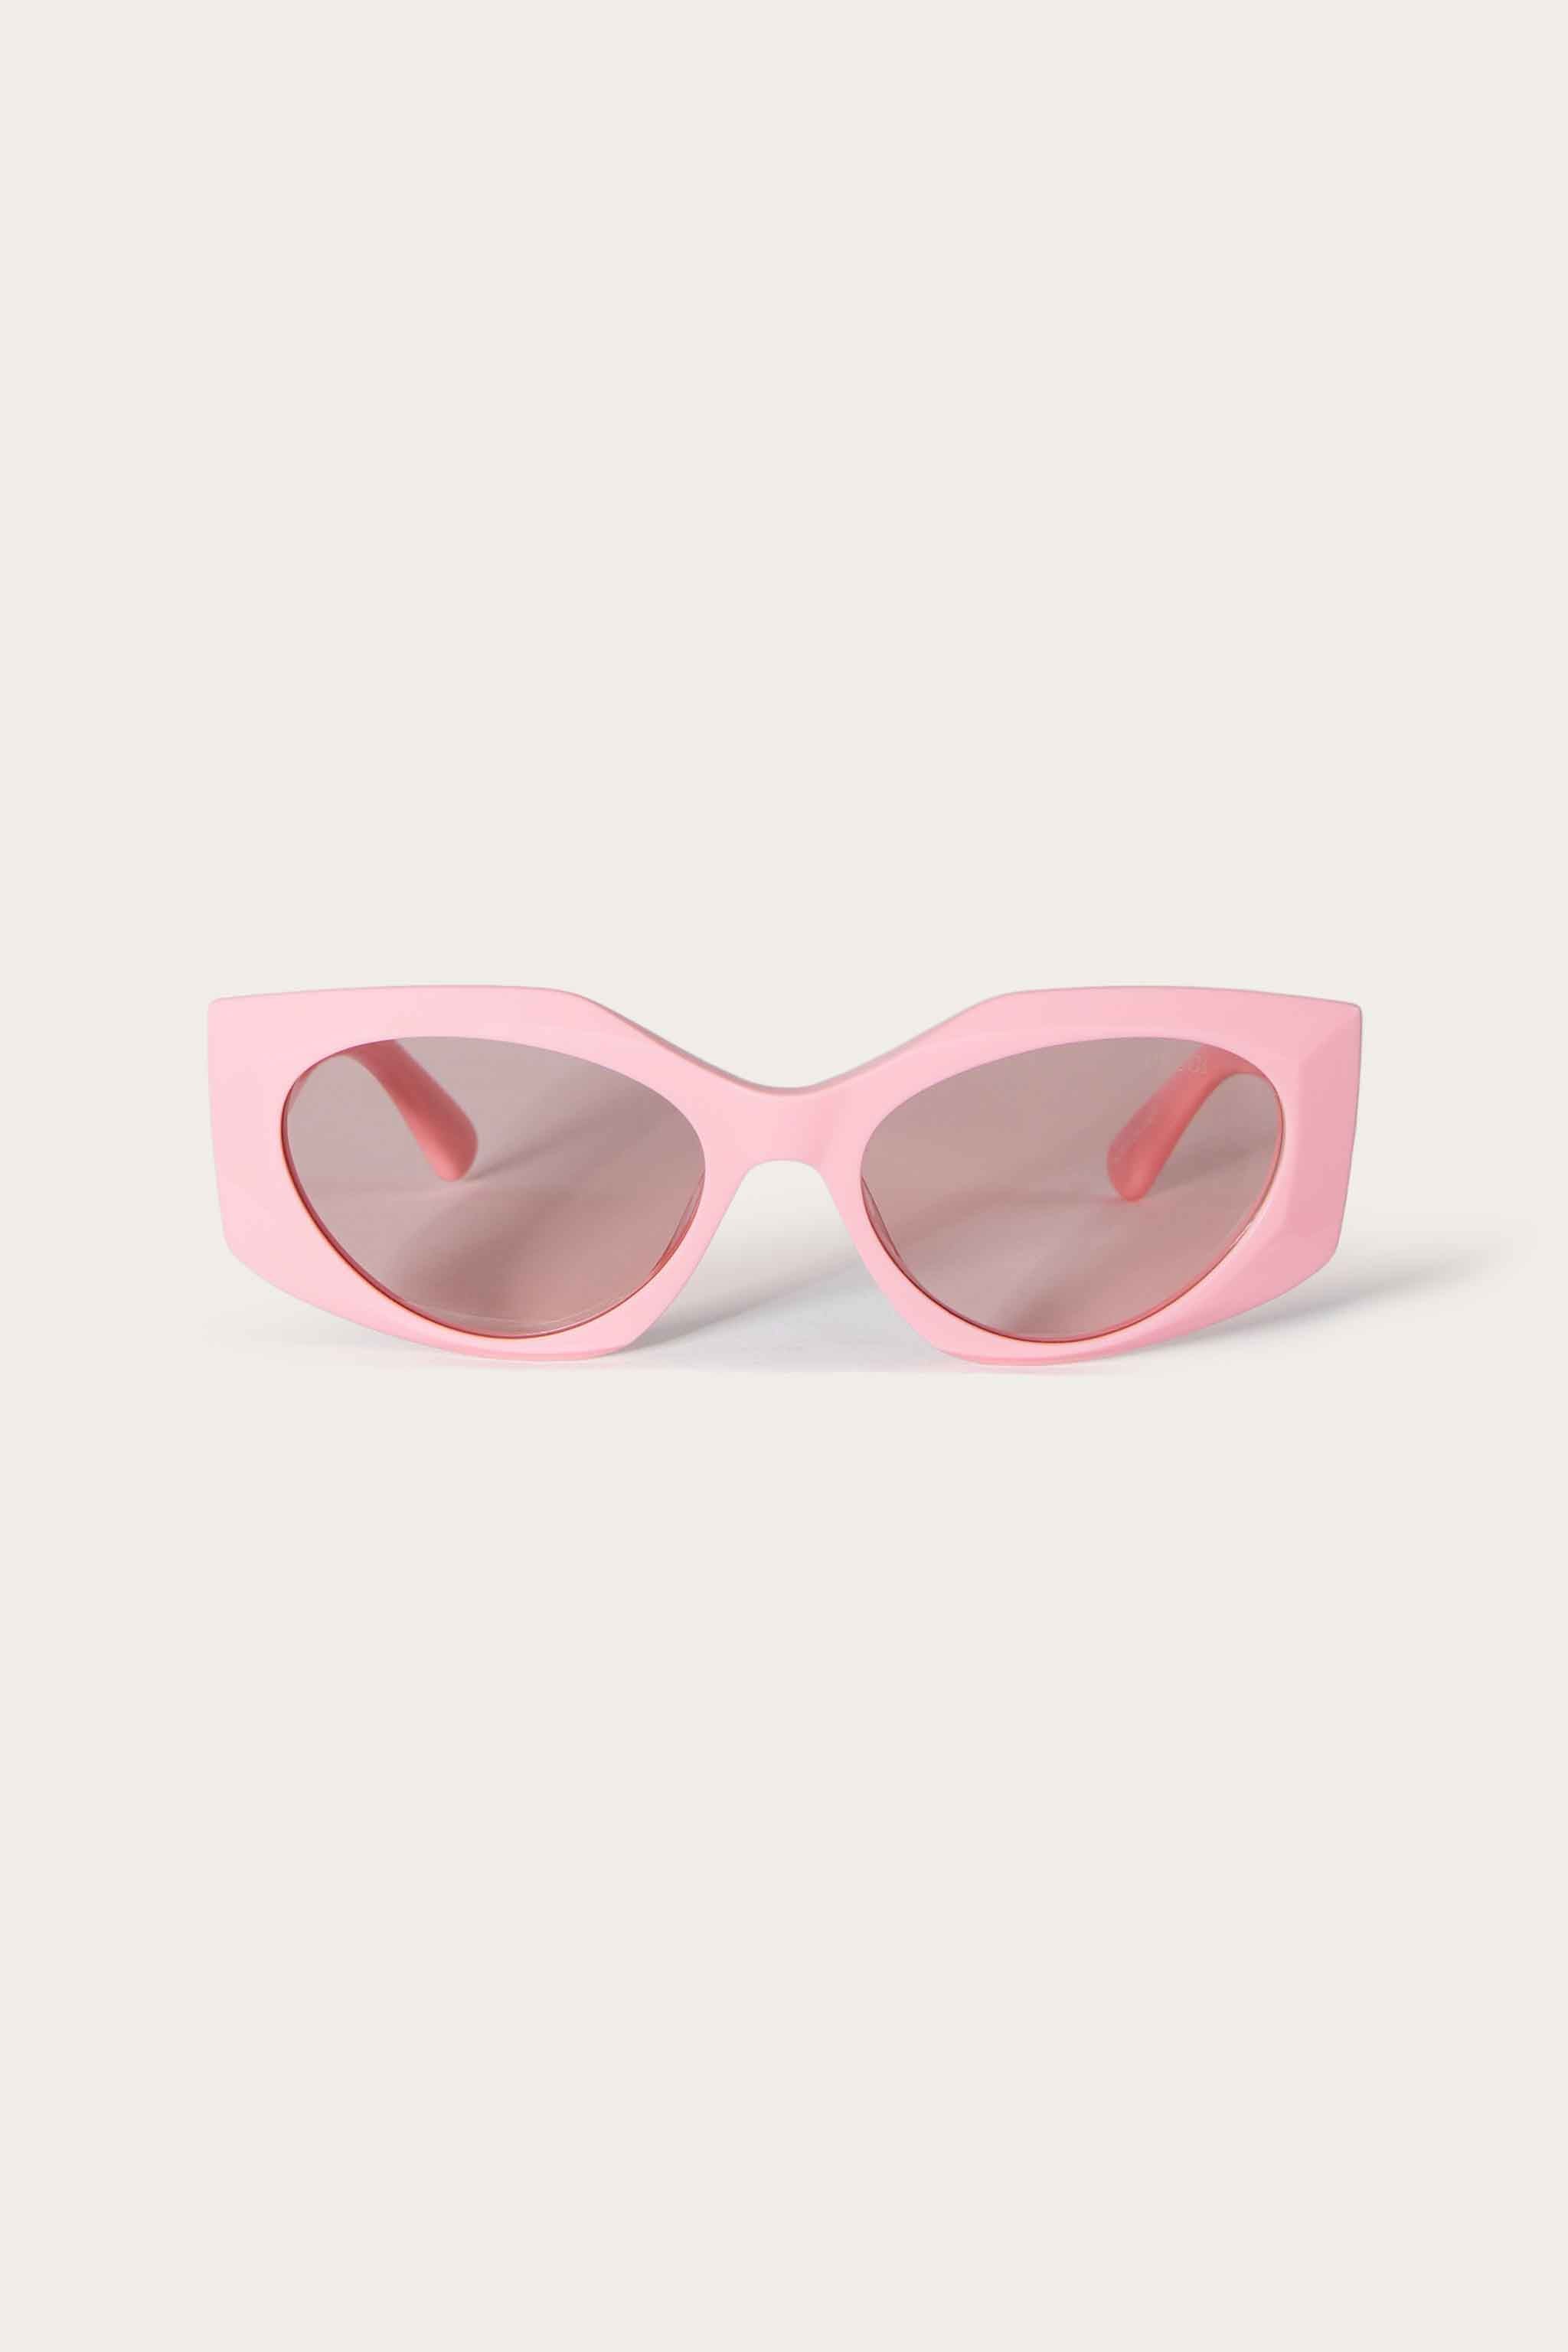 189,351 Pink Sunglasses Images, Stock Photos, 3D objects, & Vectors |  Shutterstock